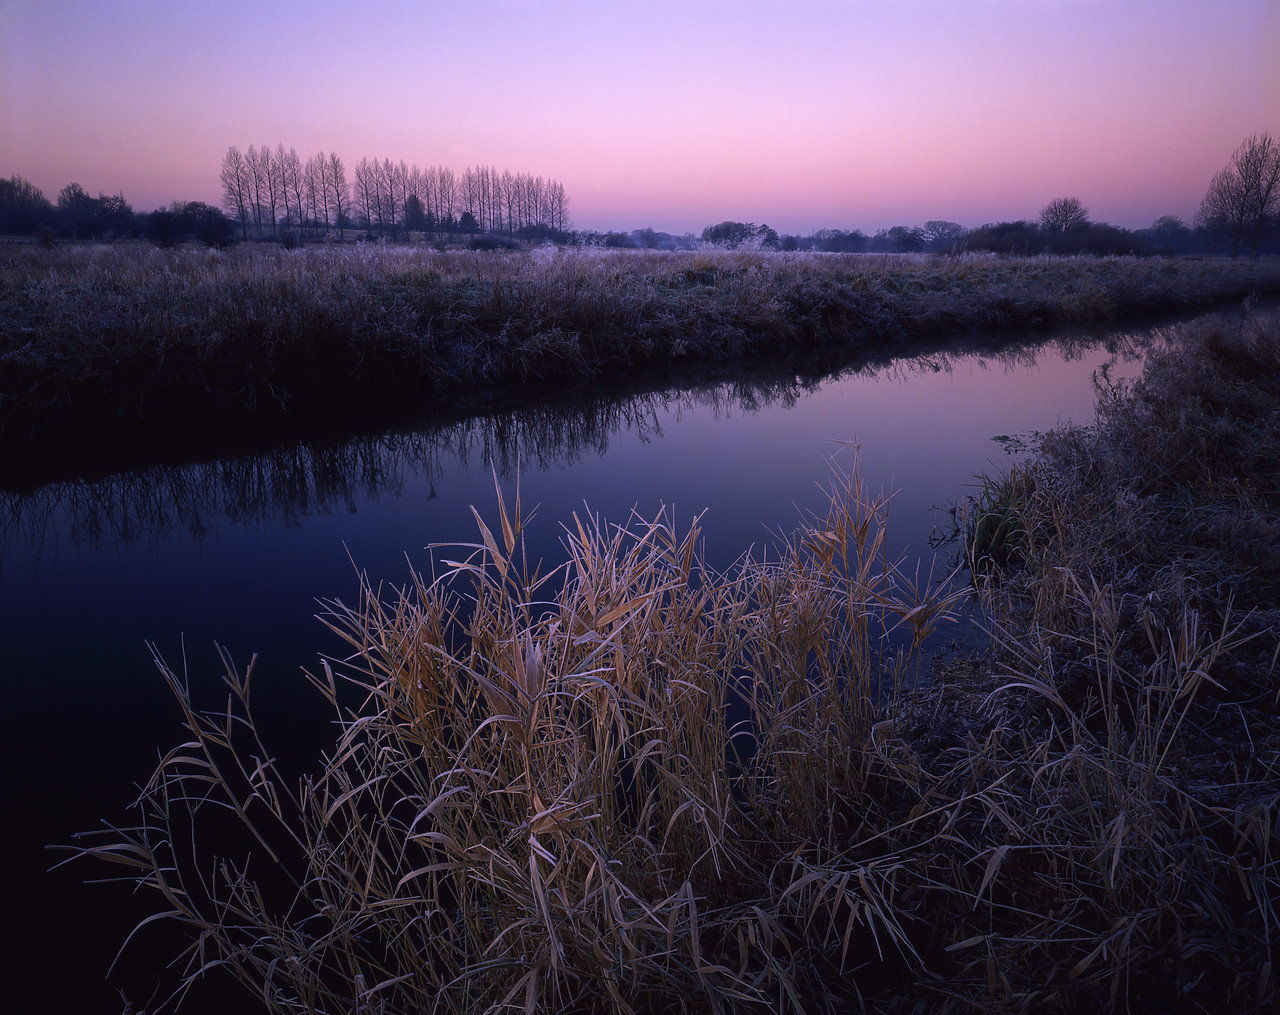 #913223-1 - Morning Frost along River Yare, Norwich, Norfolk, England